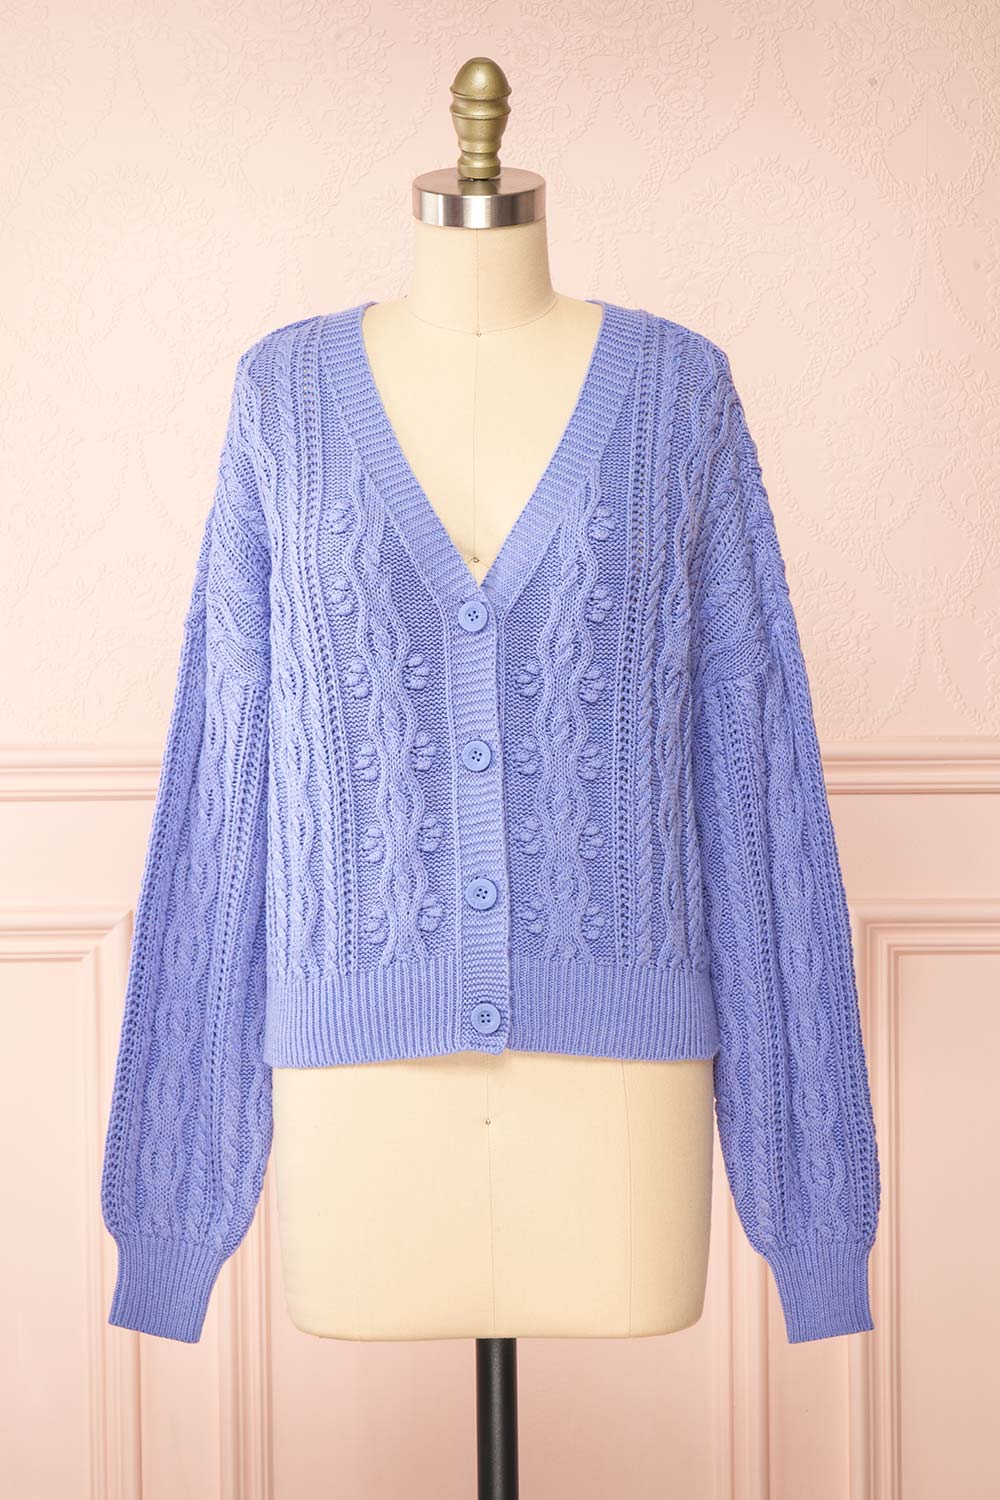 Akao Lavender Cable Knit Cardigan | Boutique 1861 front view